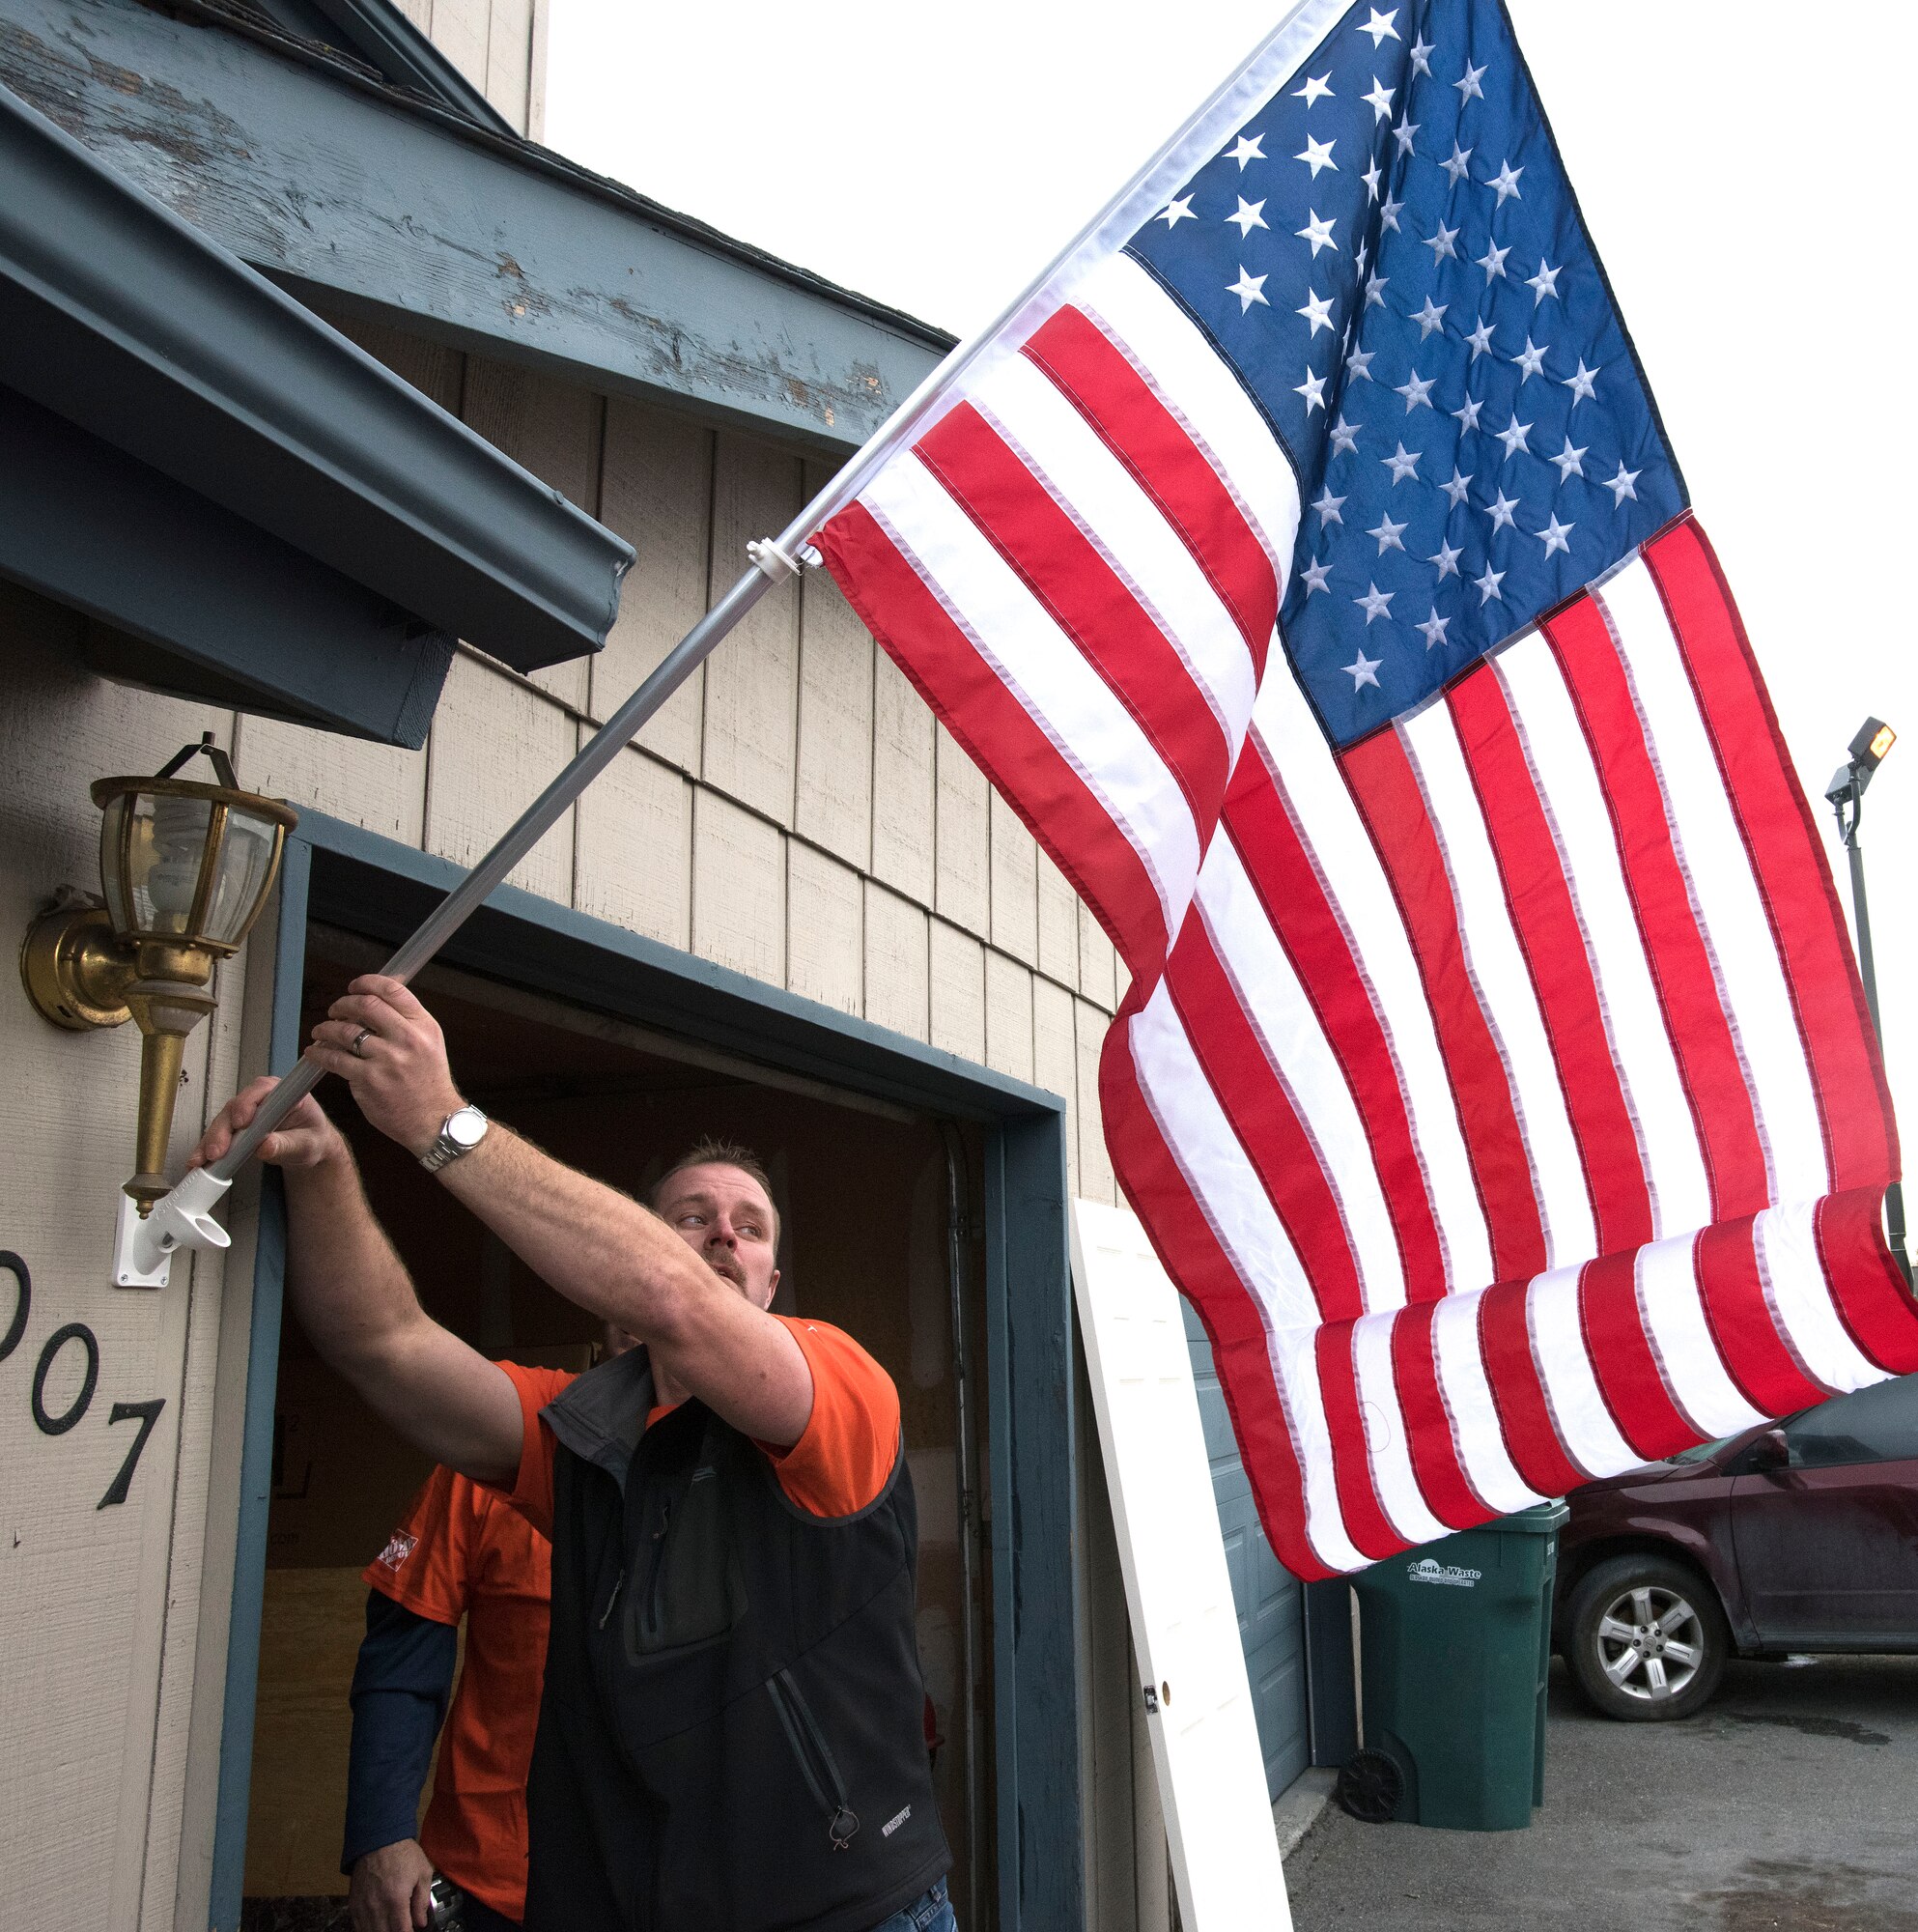 ANCHORAGE, Alaska -- A Hope Depot volunteer affixes an American flag to the residence of Staff Sgt. Sequoya Joseph, a personnelist with the Alaska Air National Guard's 176th Force Support Flight, here Sept. 14, 2016. About 50 volunteers came together to renovate Joseph's home. The effort was the result of a partnership between Home Depot's annual Celebration of Service Campaign and the non-profit That Others May Live Foundation. National Guard photo by Maj. John Callahan.